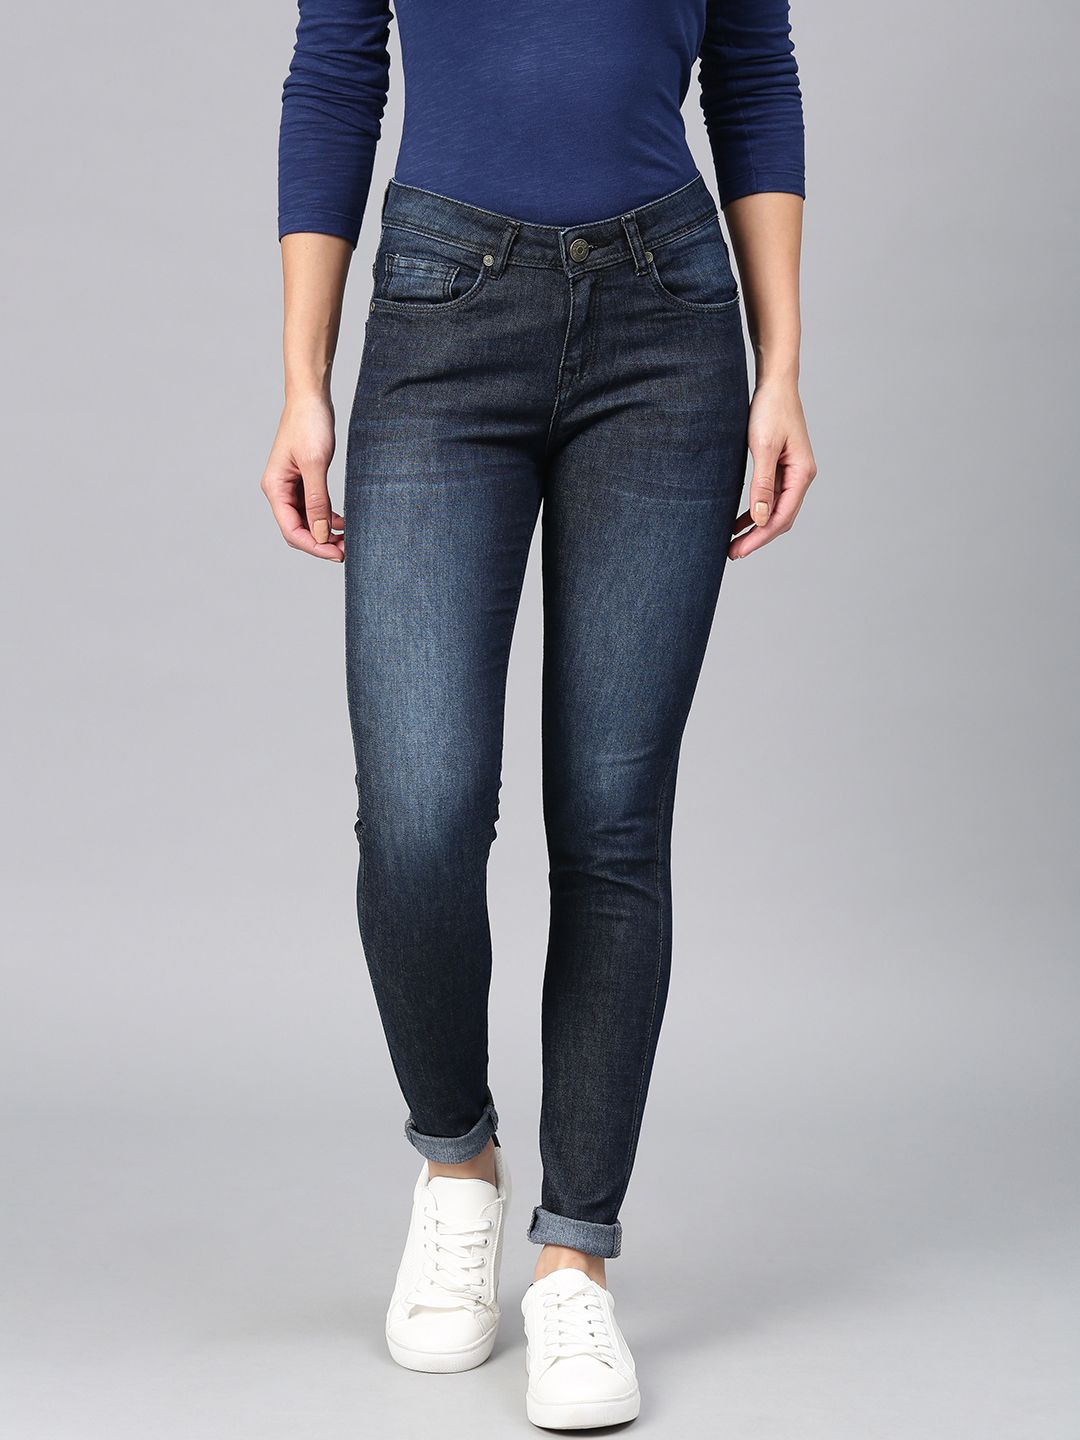 [Size 28, 30, 32] American Crew Women Navy Blue Slim Fit Mid-Rise Clean Look Stretchable Jeans